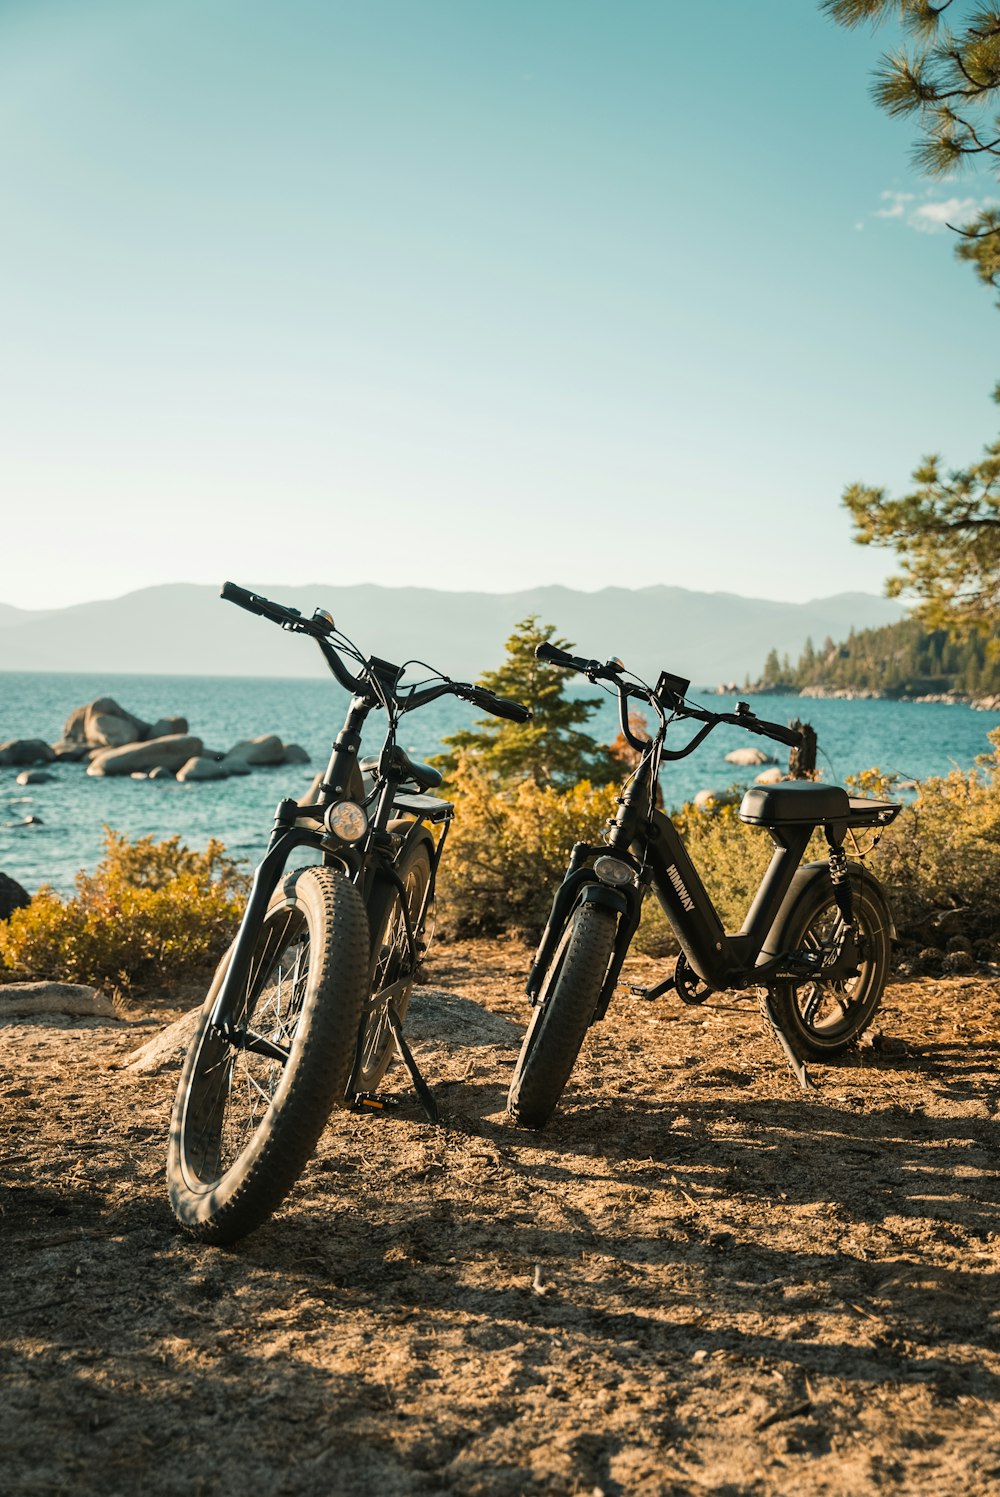 black and gray bicycle on brown sand near body of water during daytime